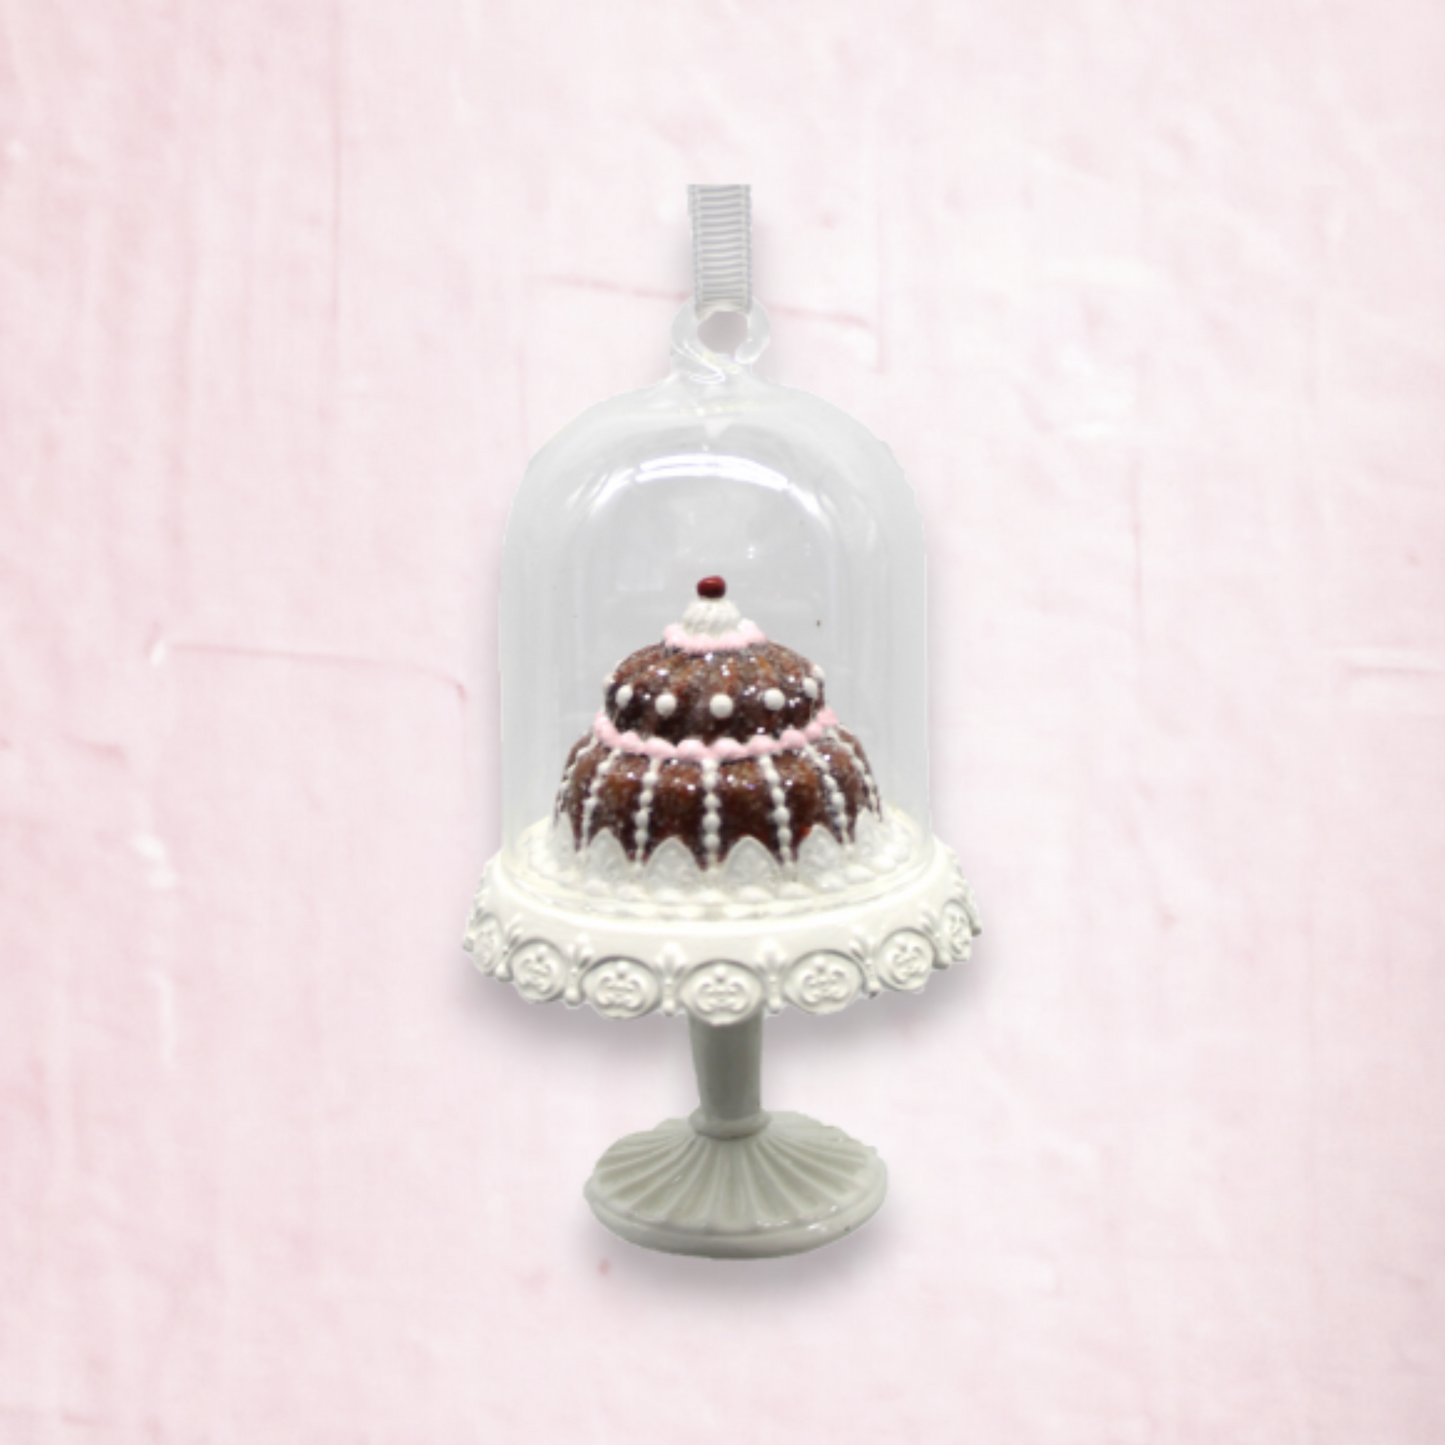 Tiered Gingerbread Cake in Cloche Orn